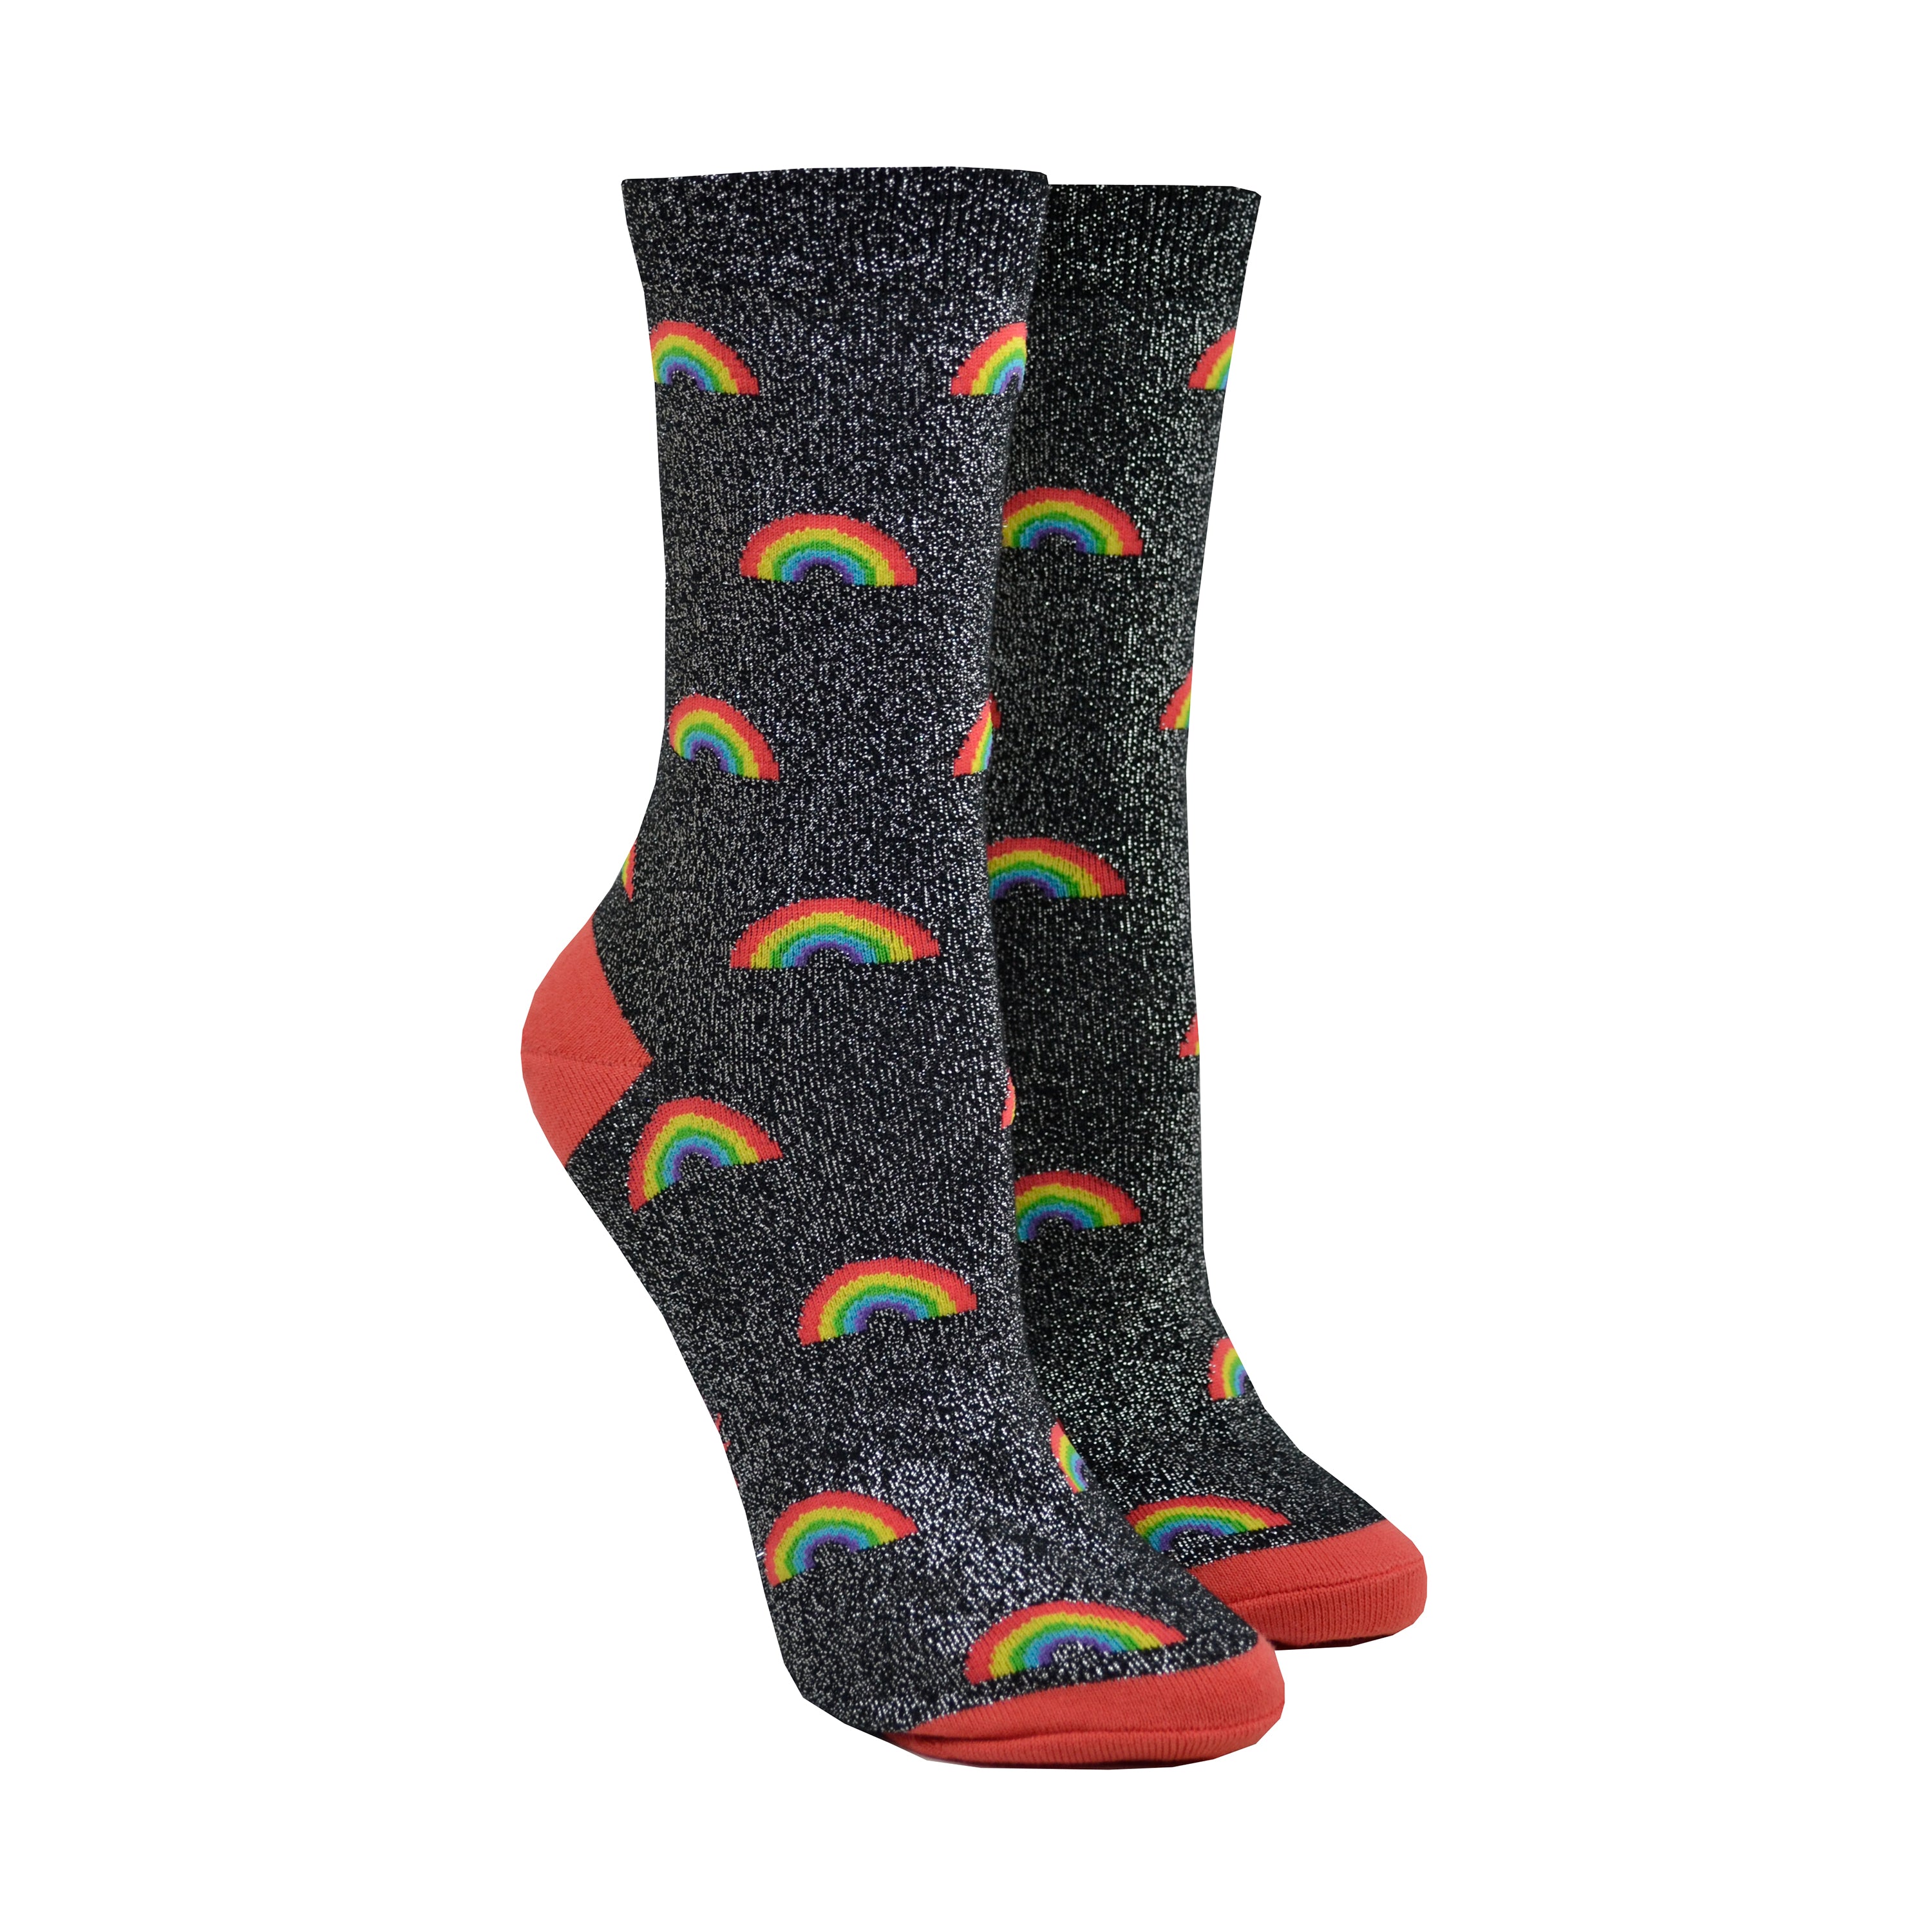 Shown on leg forms, a pair of women's Sock it to Me cotton sparkle crew socks in black with a red heel and toe and an all over glitter rainbow motif.